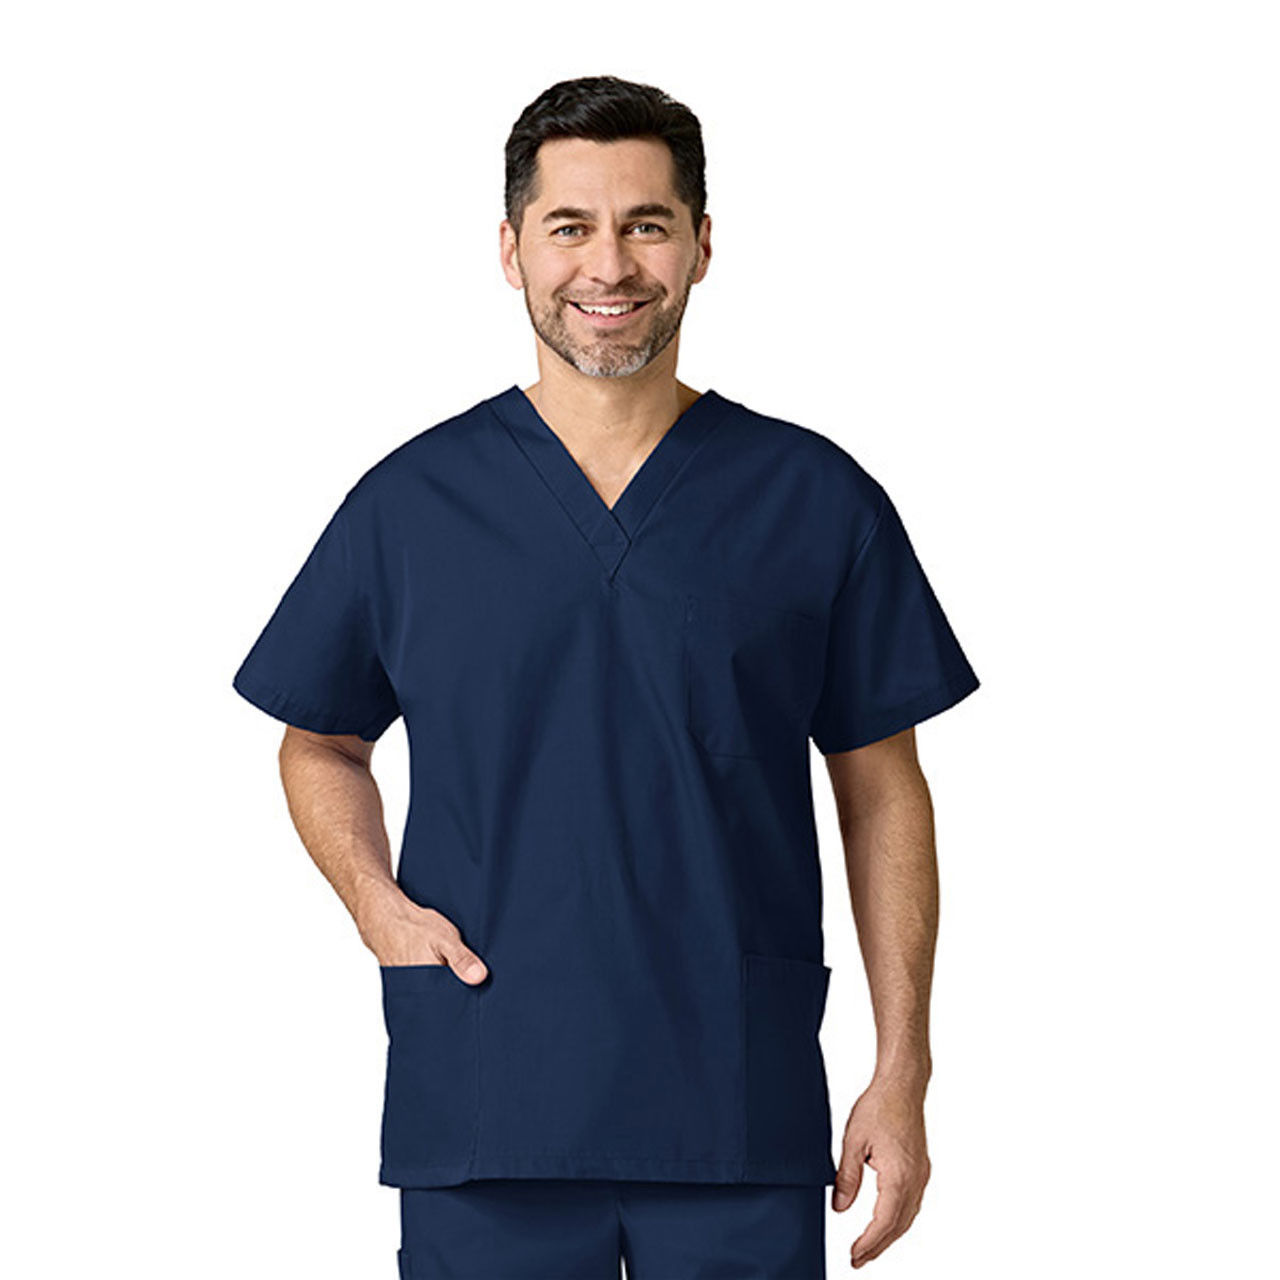 What color is the Navy Blue Scrub Top?